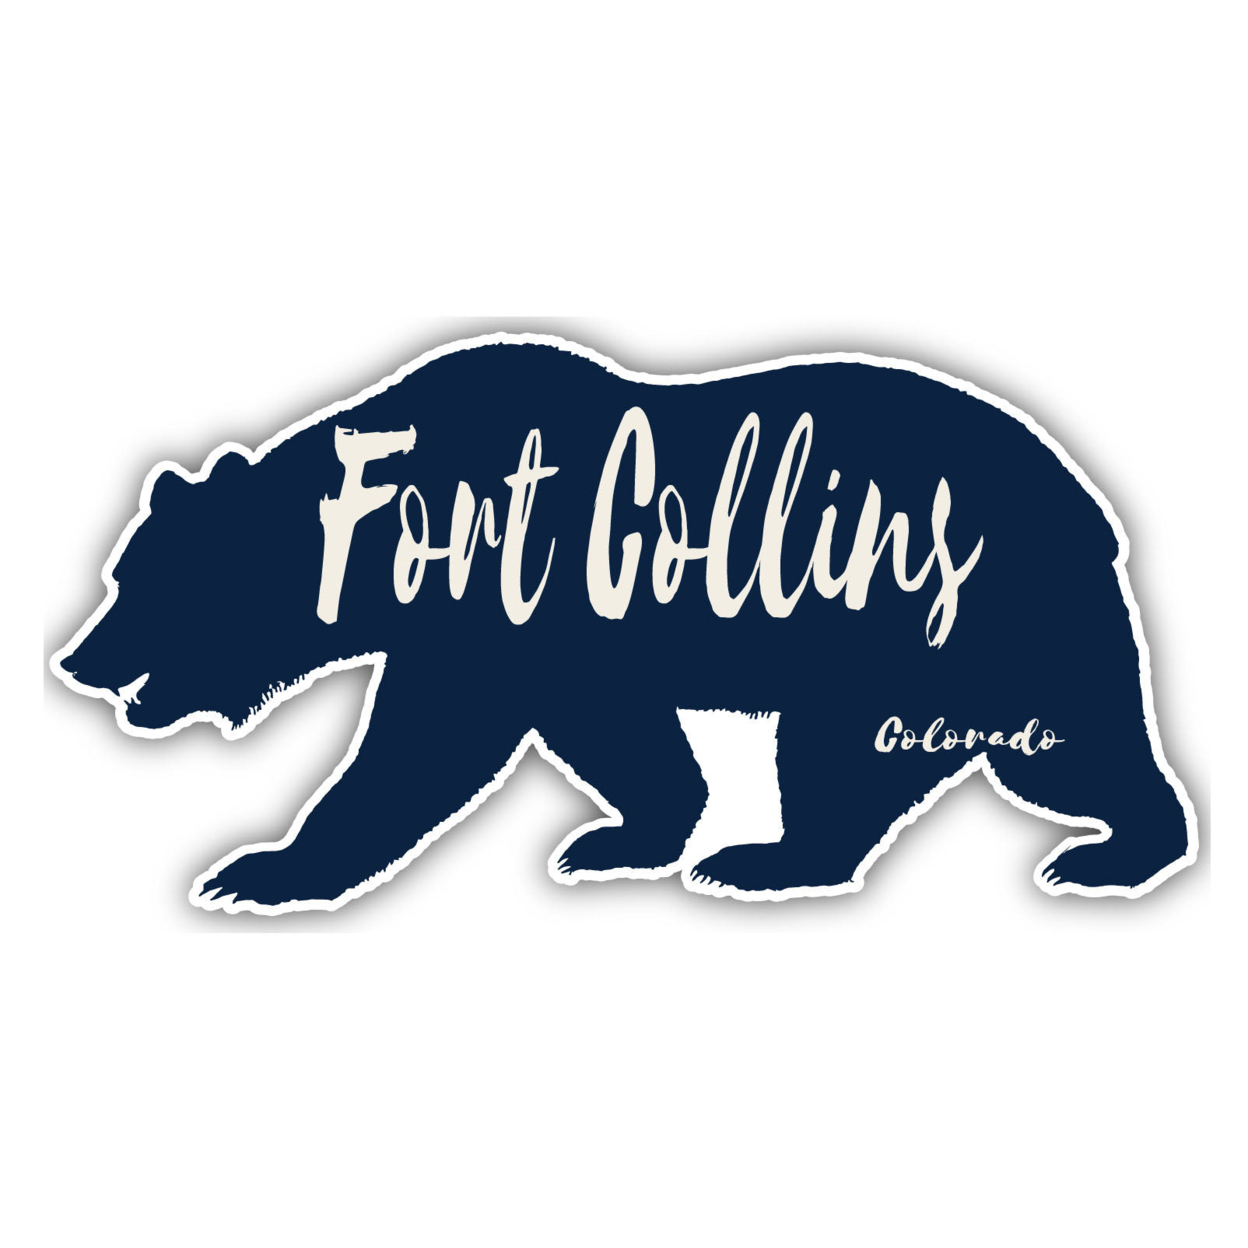 Fort Collins Colorado Souvenir Decorative Stickers (Choose Theme And Size) - Single Unit, 6-Inch, Great Outdoors